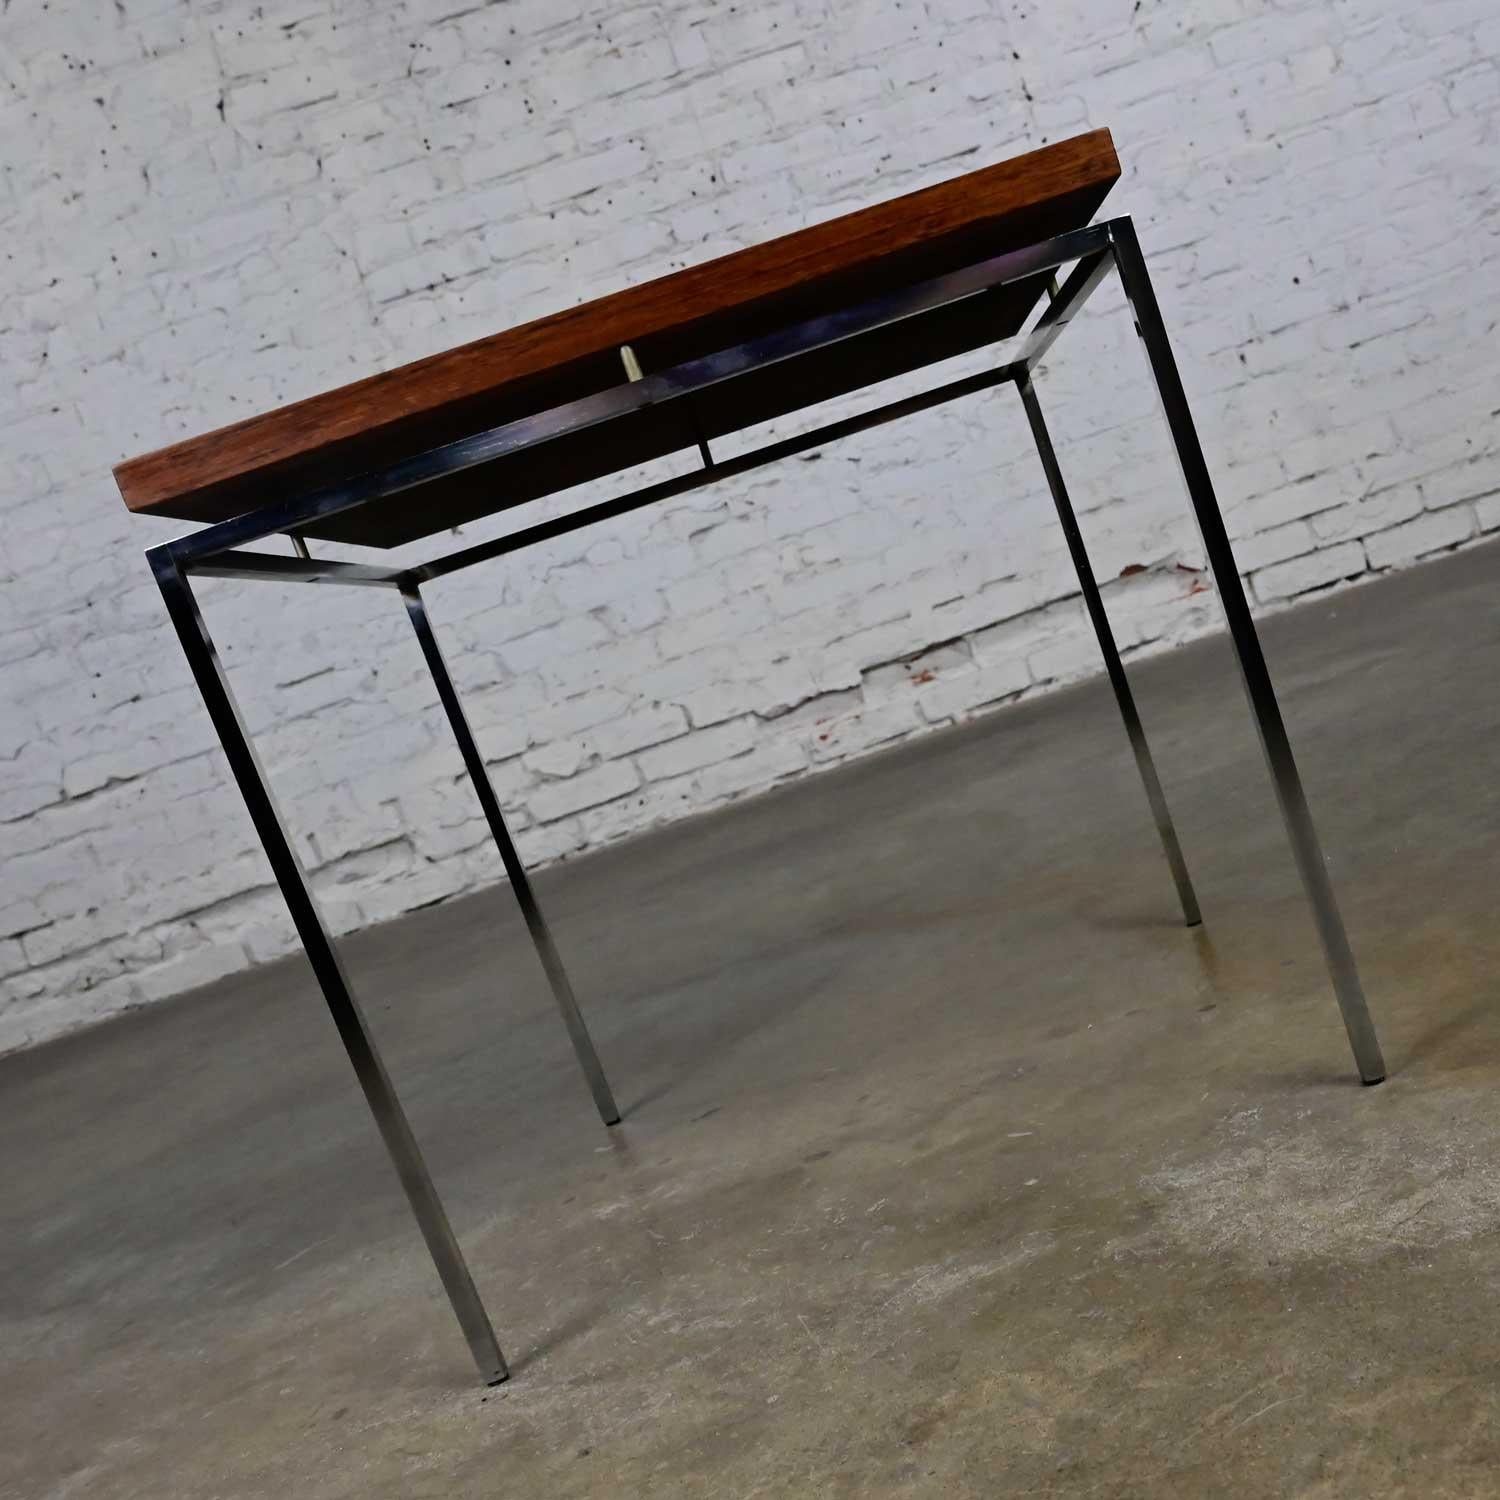 Aluminum Scandinavian Modern Rosewood & Chrome End Table by Knud Joos for Jason Mobler For Sale